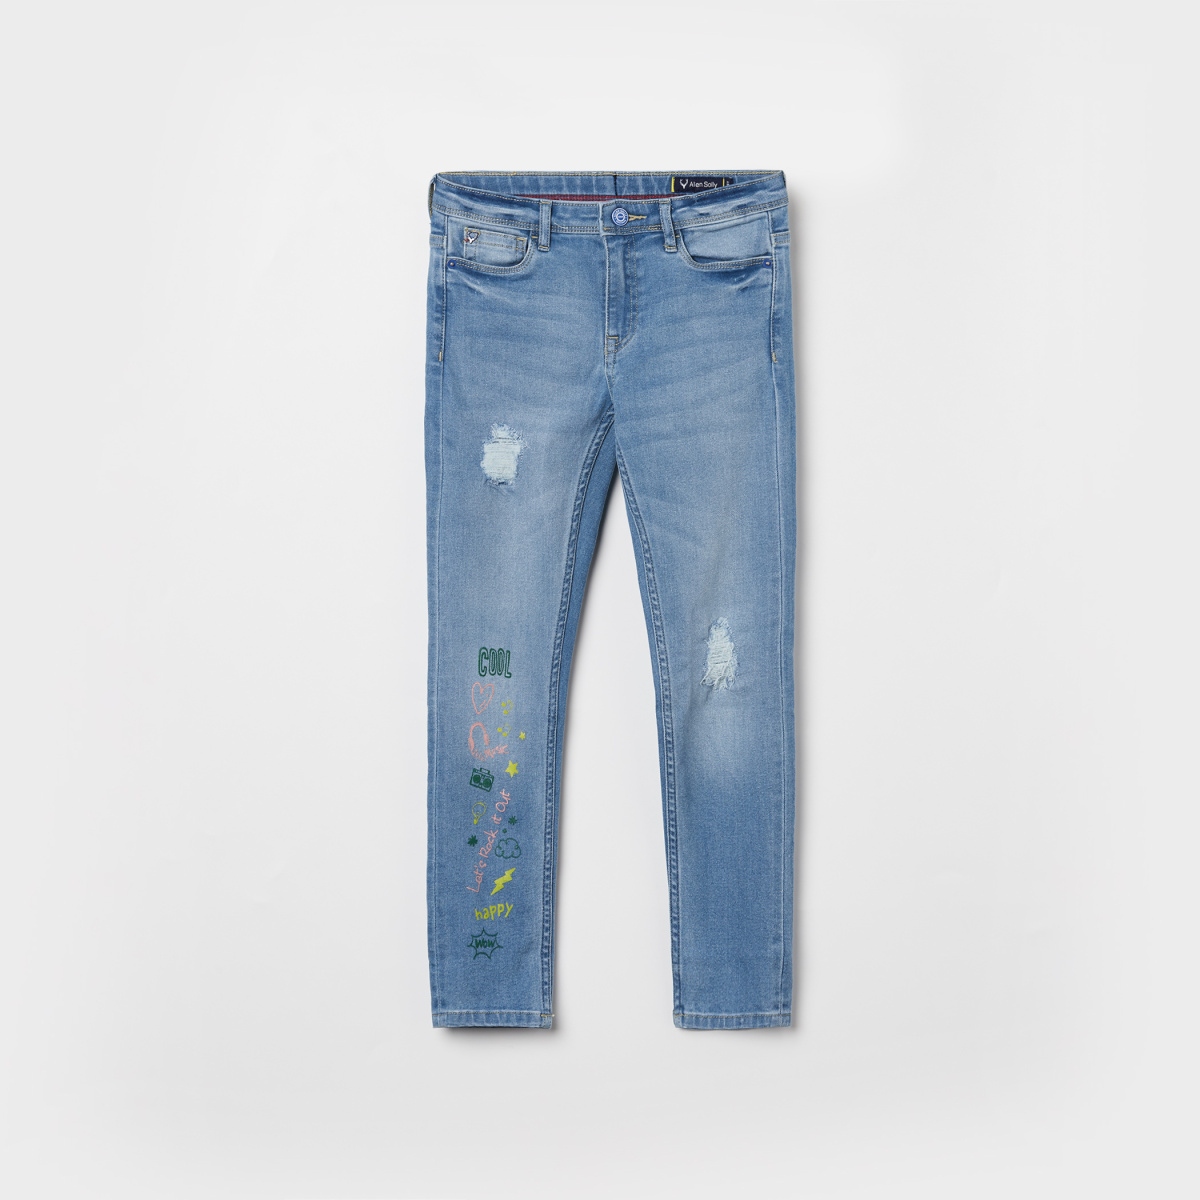 ALLEN SOLLY Boys Printed Skinny Fit Jeans